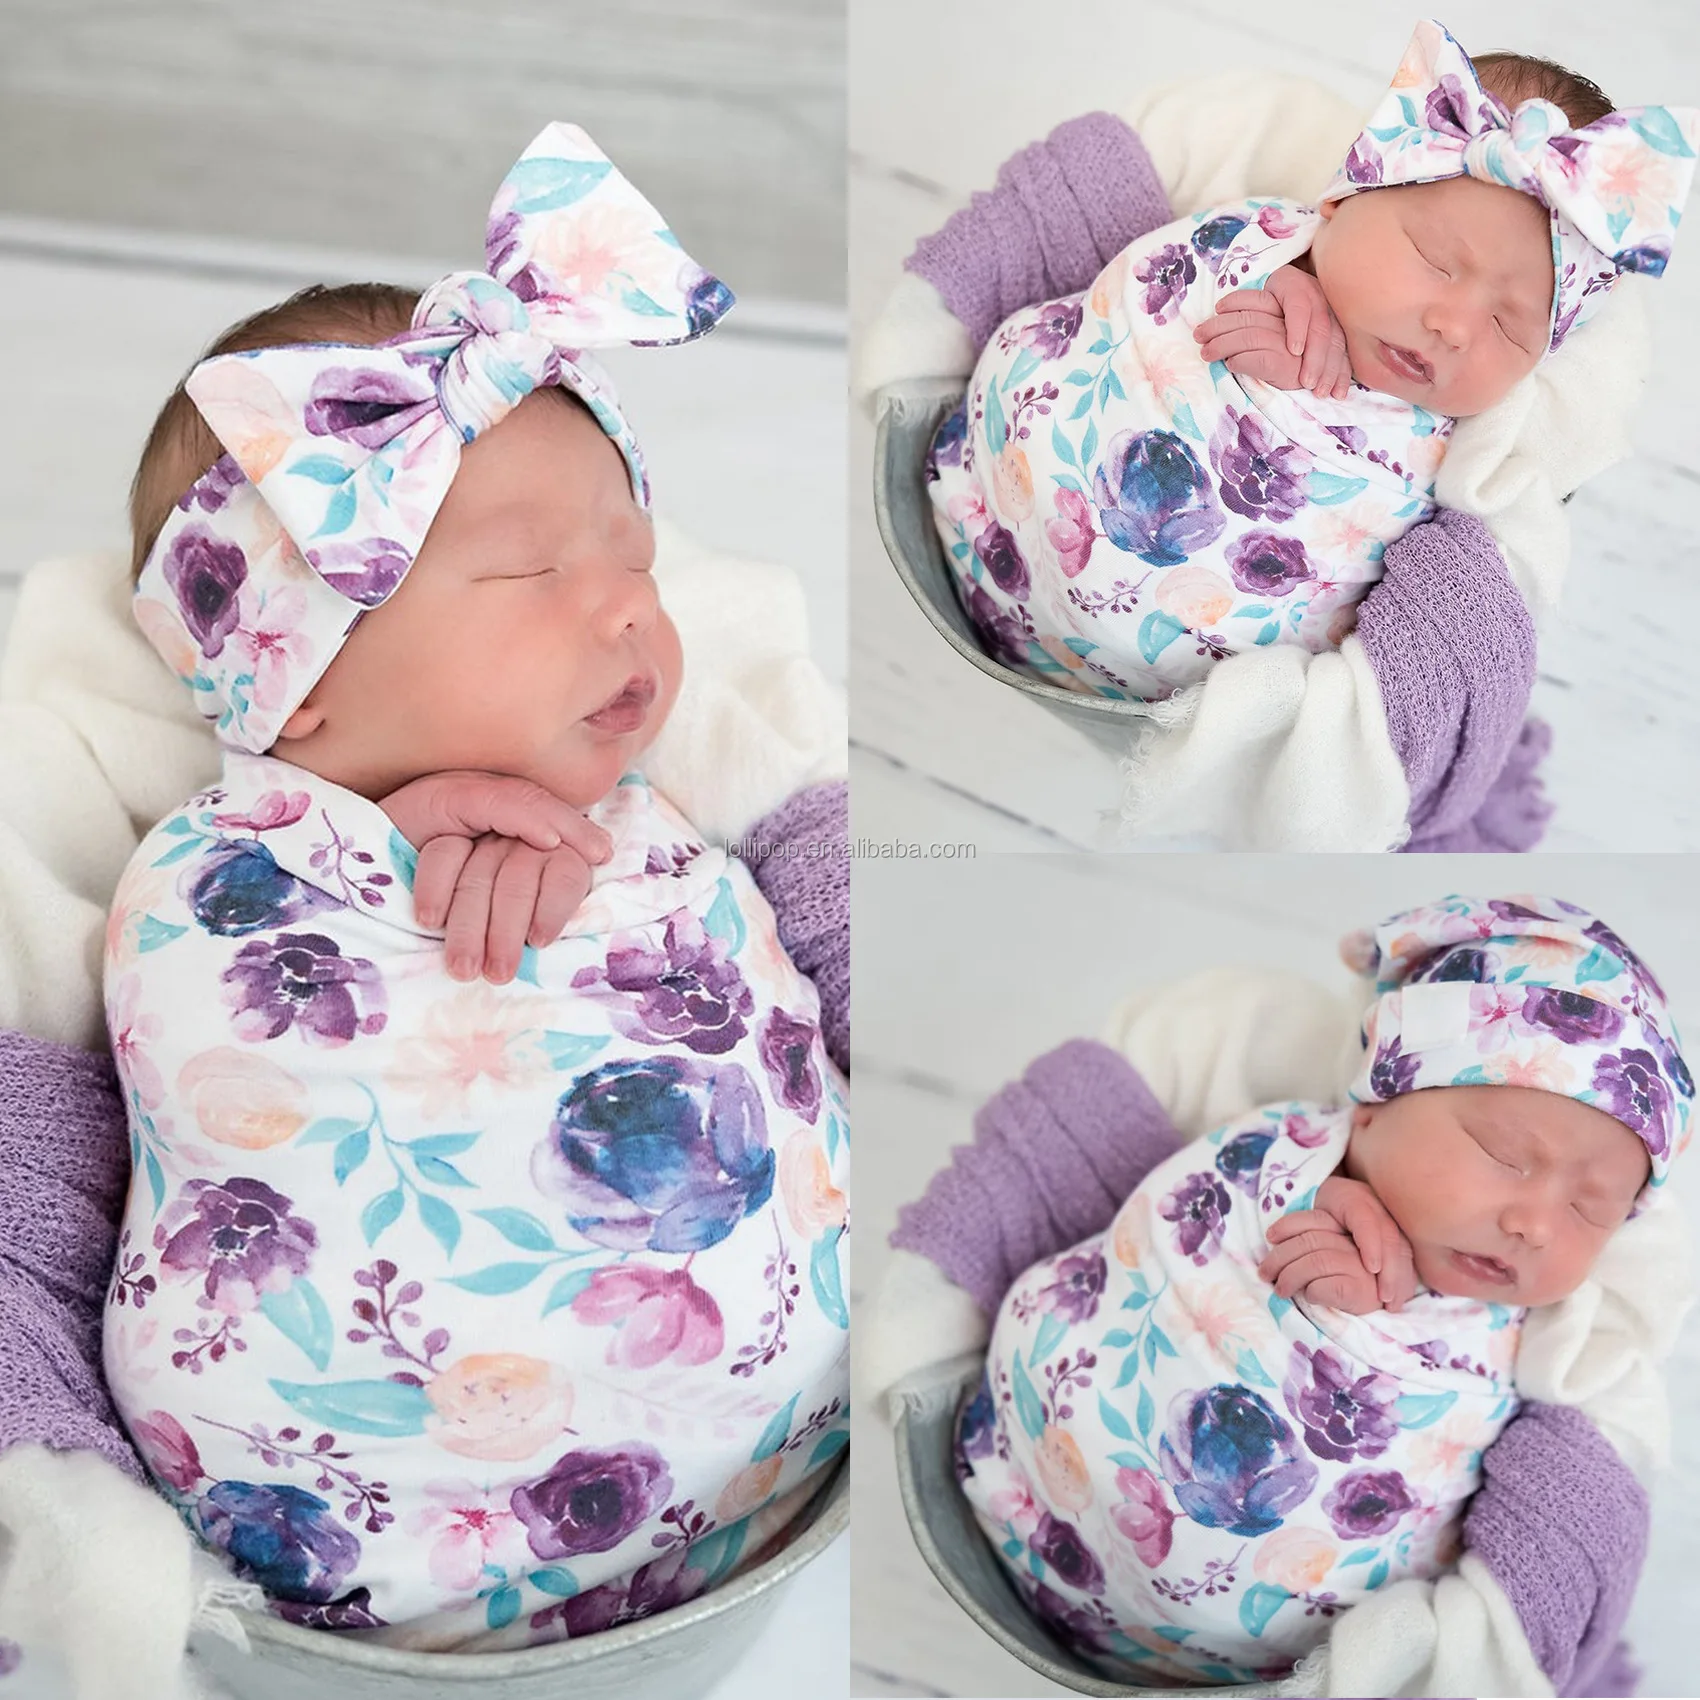 BBcolor-3-1 Newborn Cute Receiving Blankets for Boy Girl 0-3 Months 